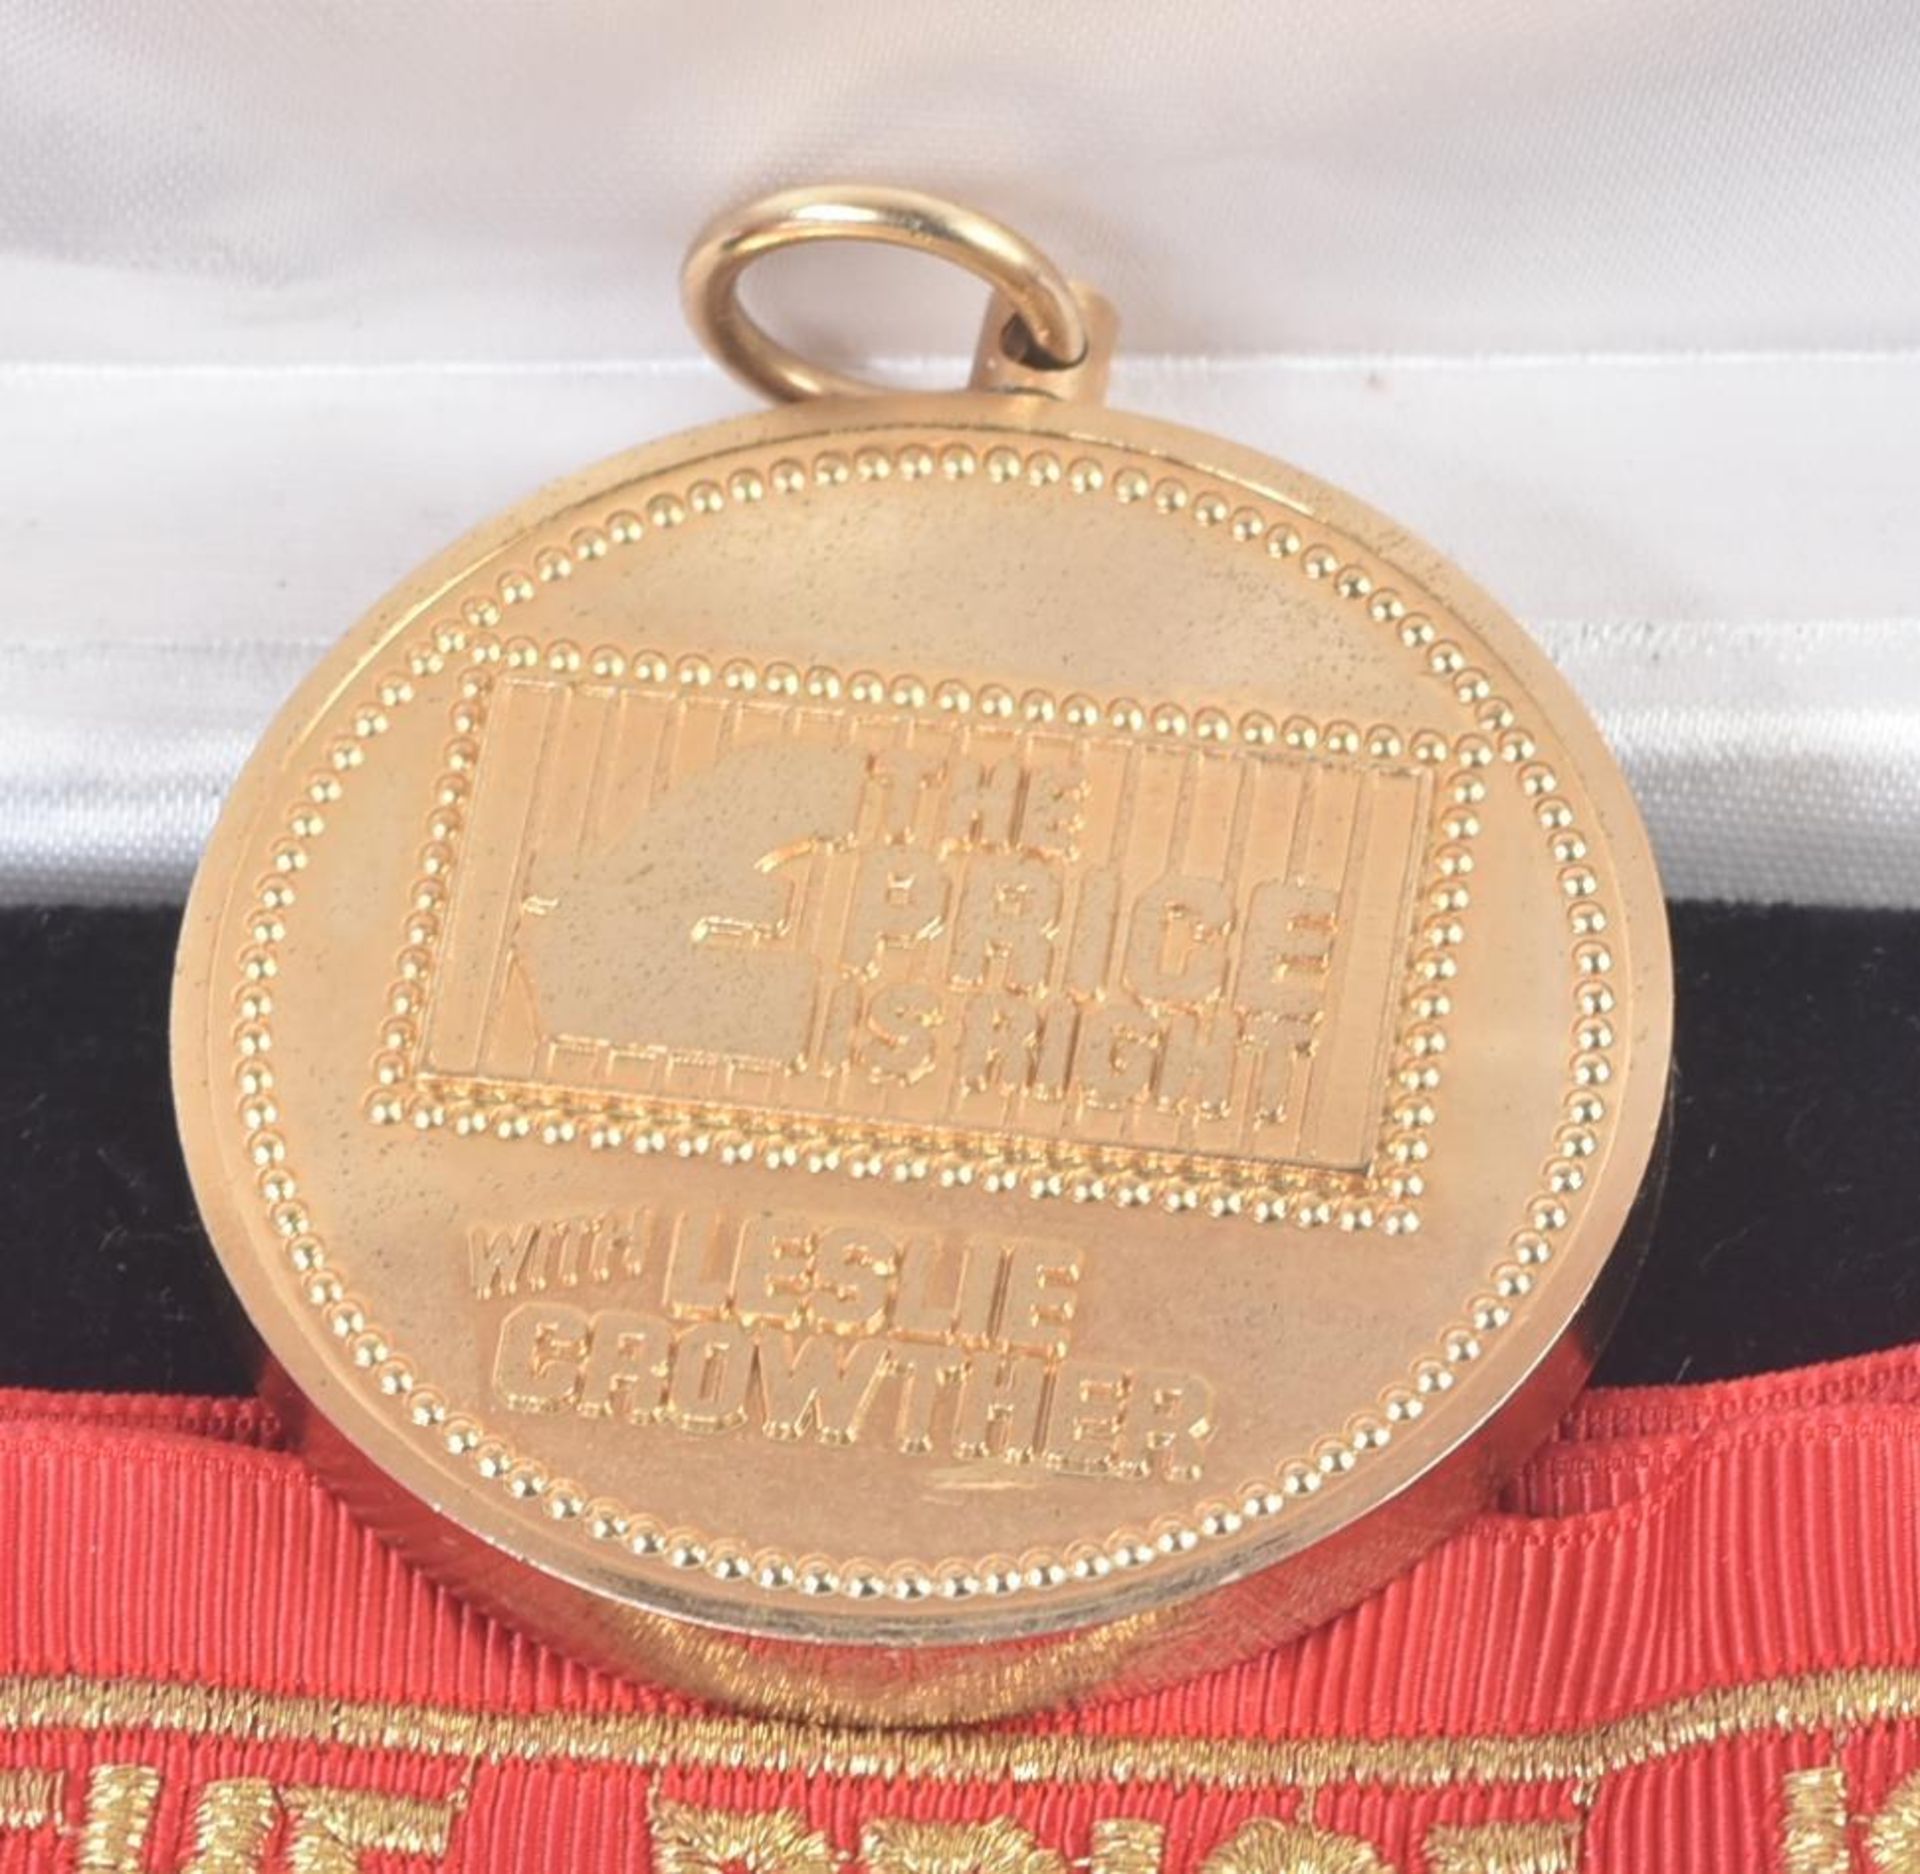 THE PRICE IS RIGHT (1984-1988 GAME SHOW) - ORIGINAL CONTESTANT MEDAL - Image 3 of 6